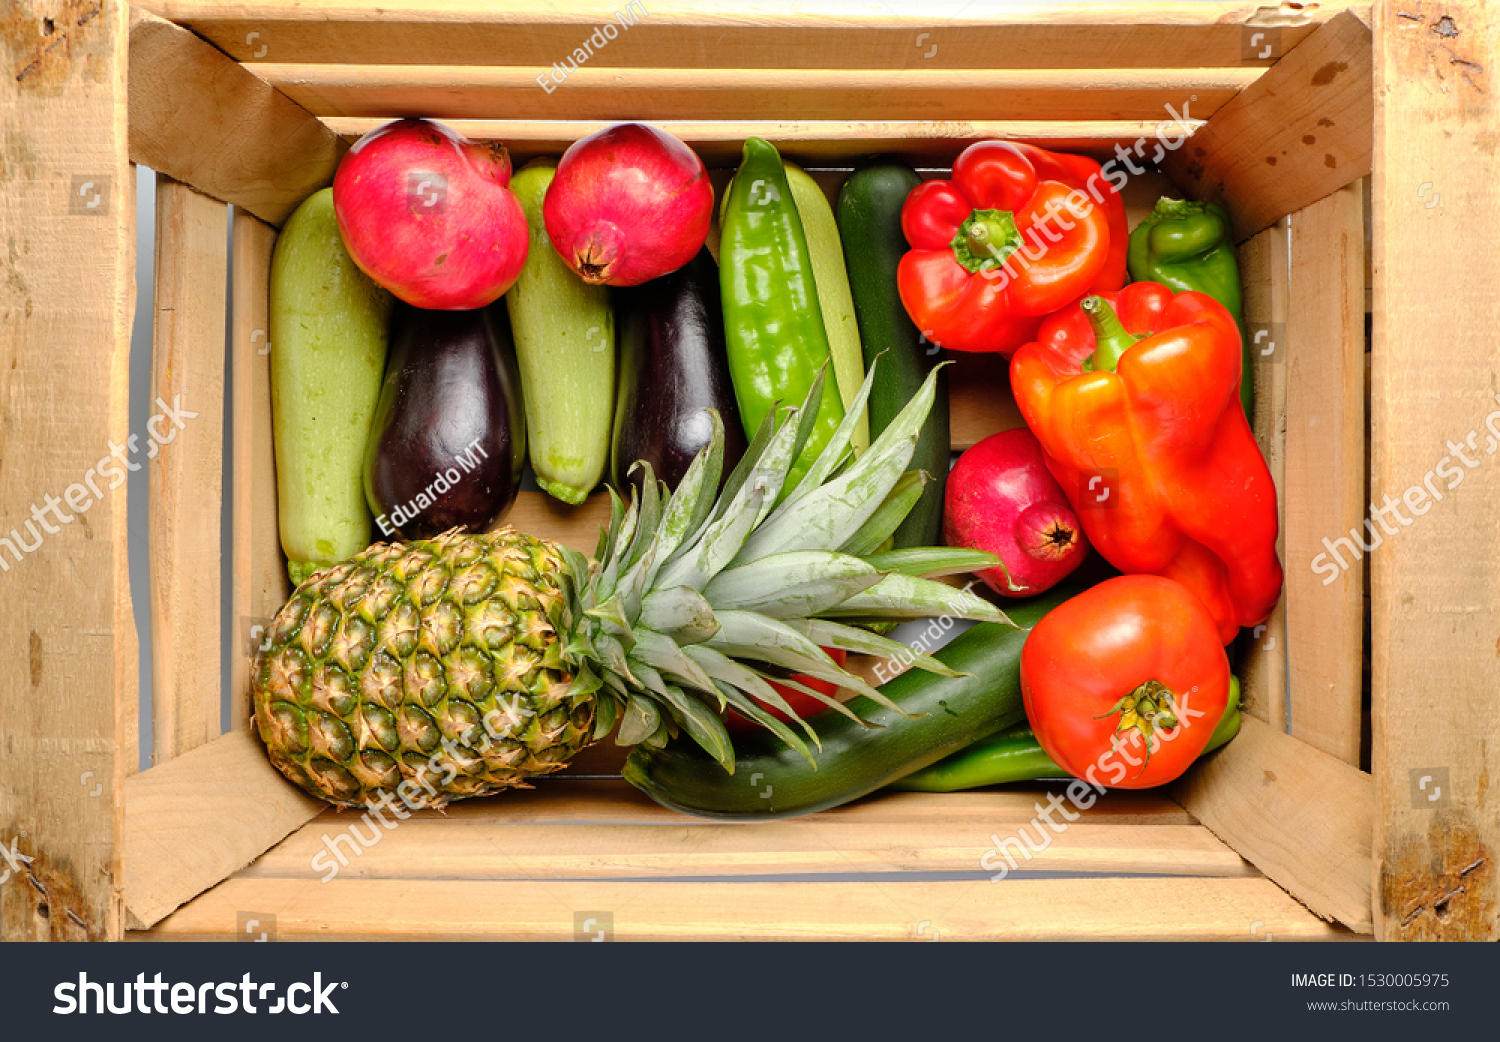 Old wooden box with freshly harvested vegetables and fresh fruits #1530005975